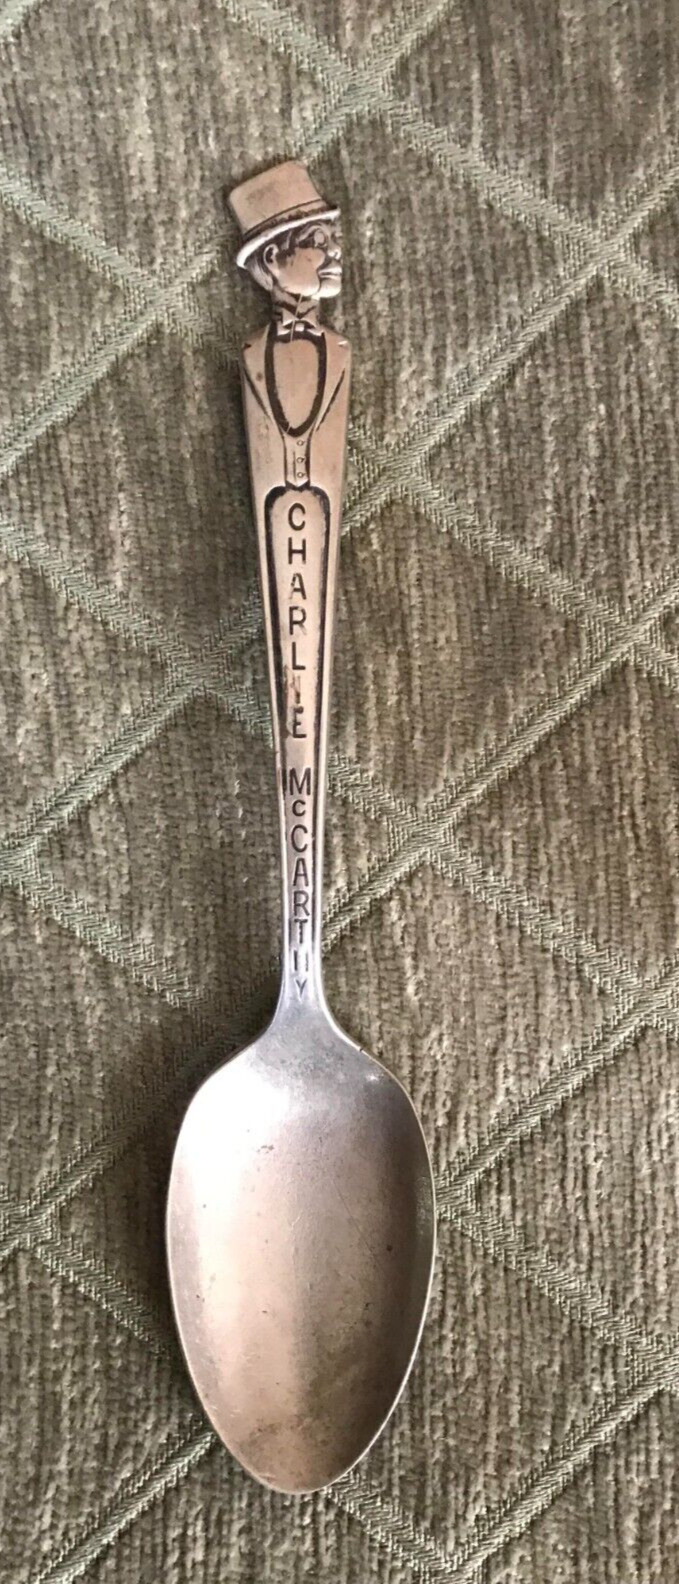 Duchess Silverplate Charlie McCarthy Character Spoon - Nice Condtition